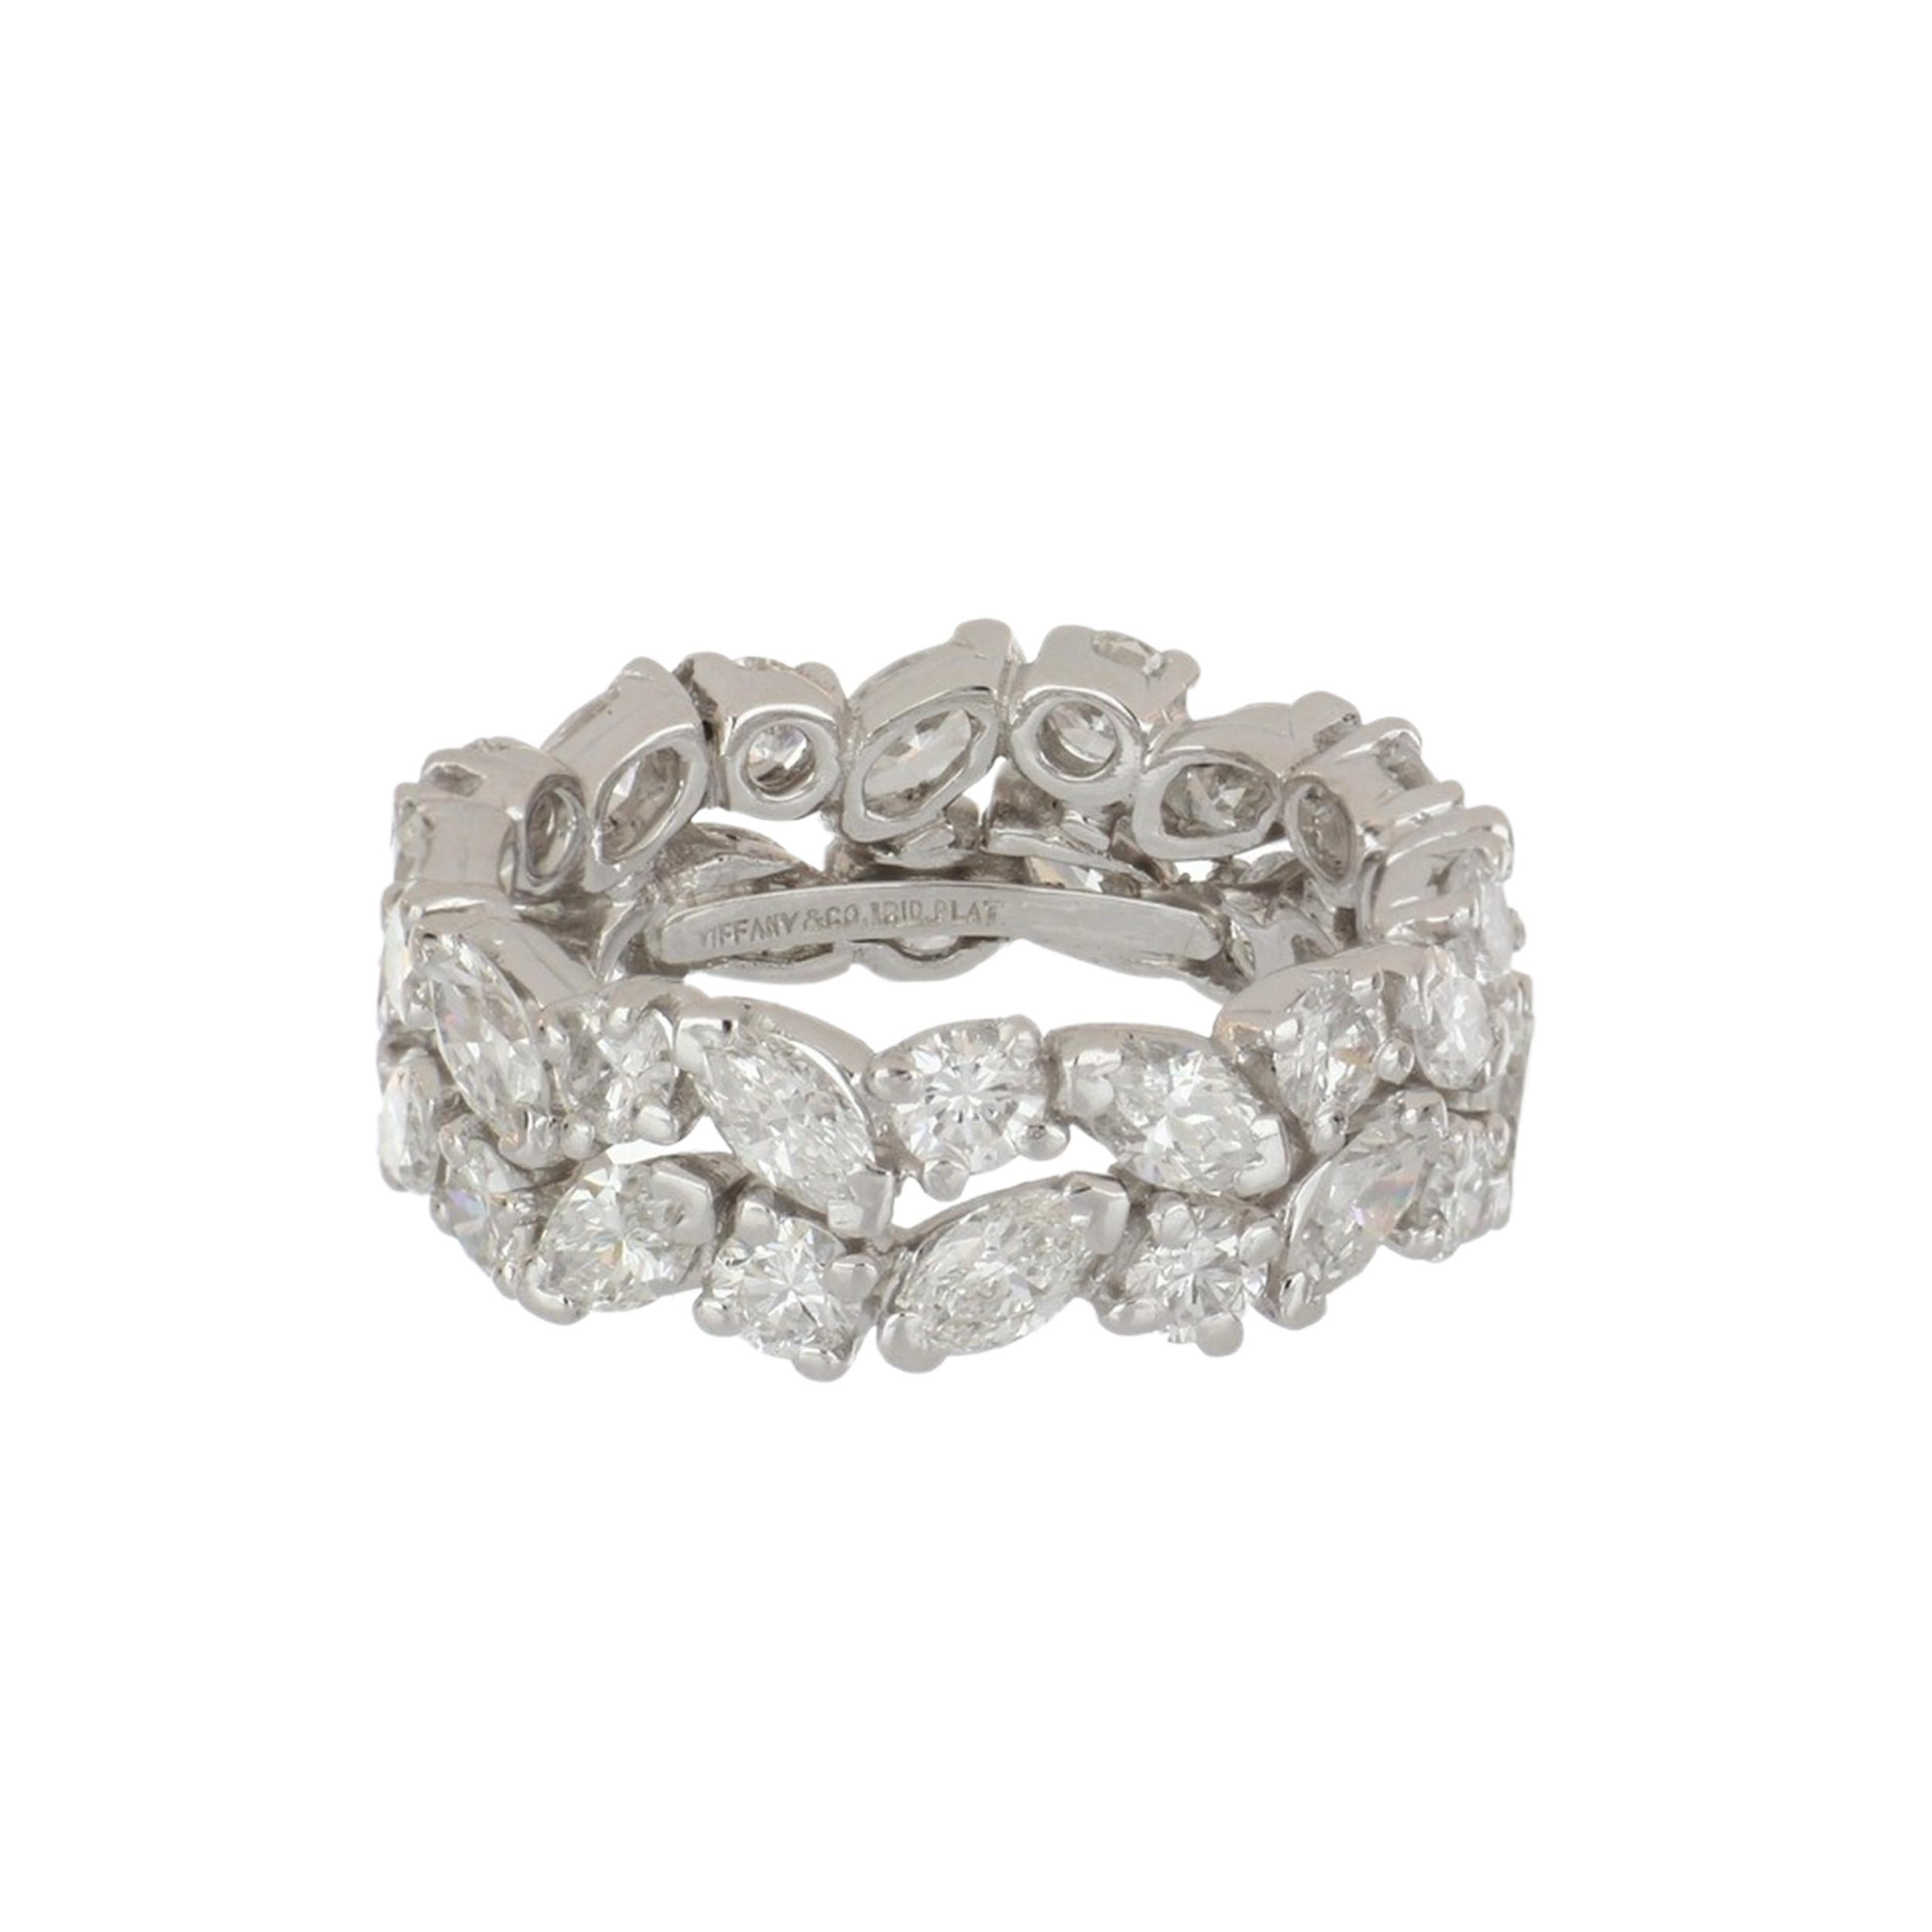 Vintage Tiffany & Co. diamond eternity band, featuring a double row of marquise and round brilliant-cut diamonds in an alternating pattern, set in platinum. There are 18 round brilliant-cut diamonds totaling 1.65 carats, E-F in color, VVS1-VS1 in